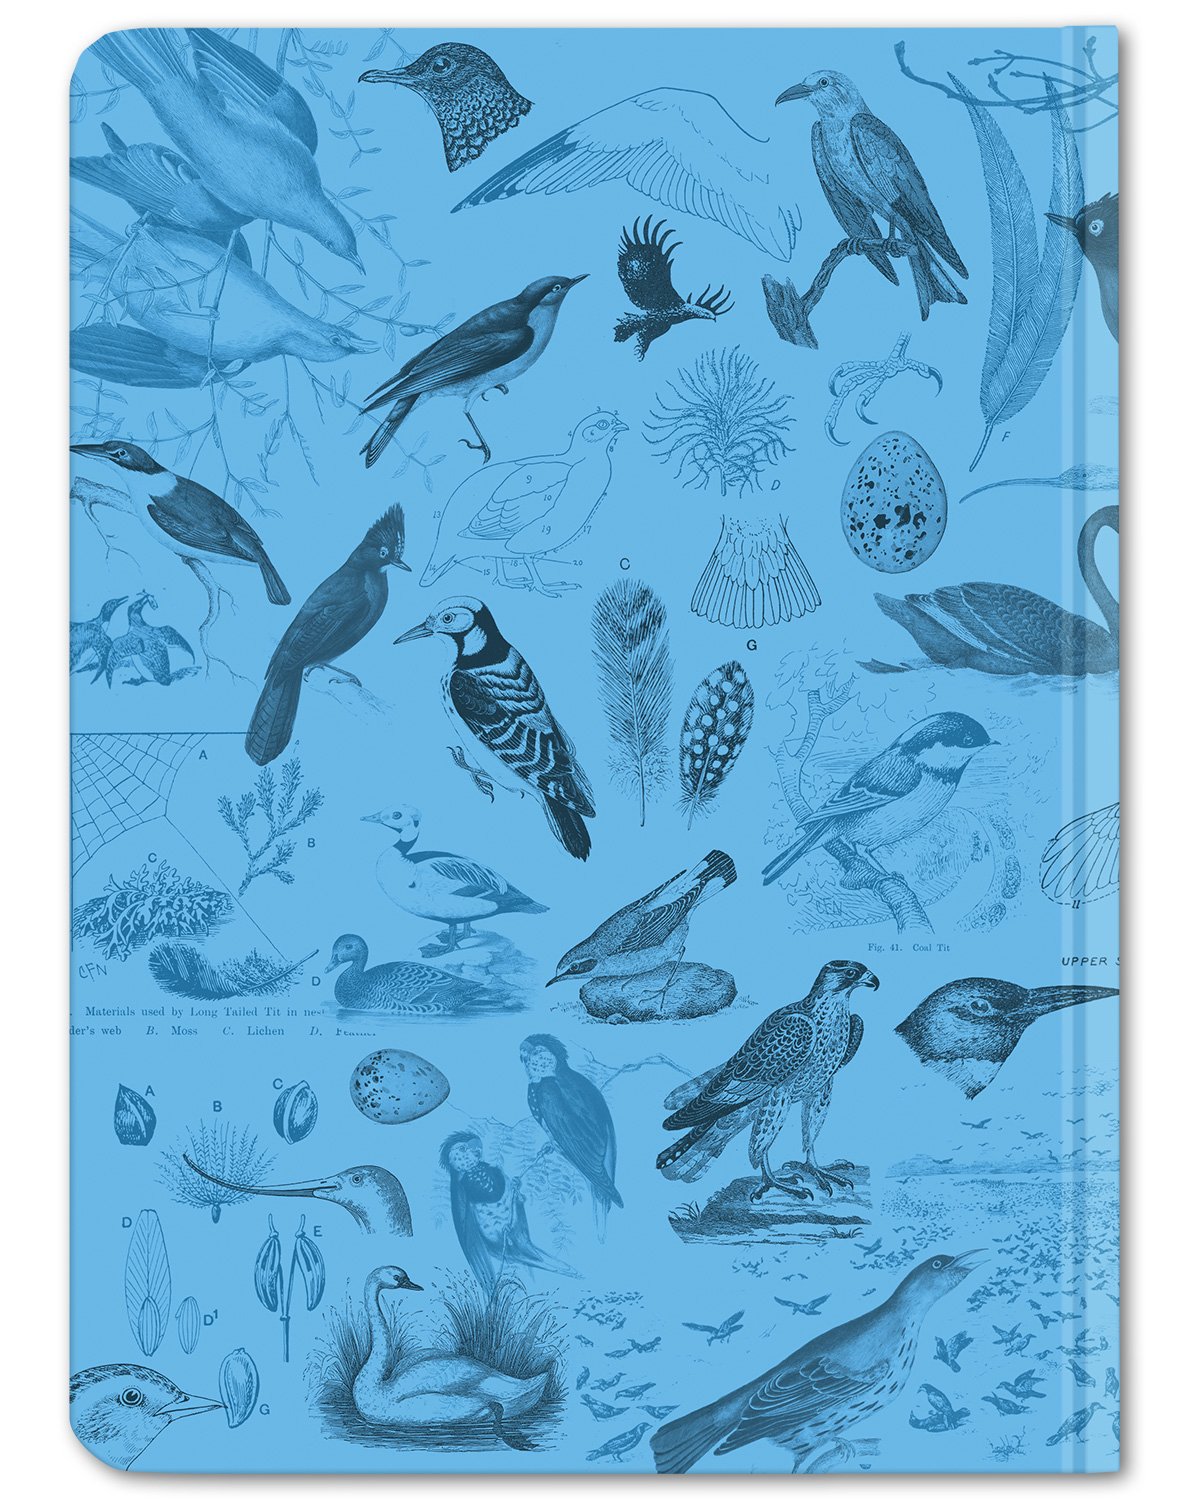 Back cover of Birds ornithology hardcover dot grid notebook by Cognitive Surplus, 100% recycled paper, sky blue